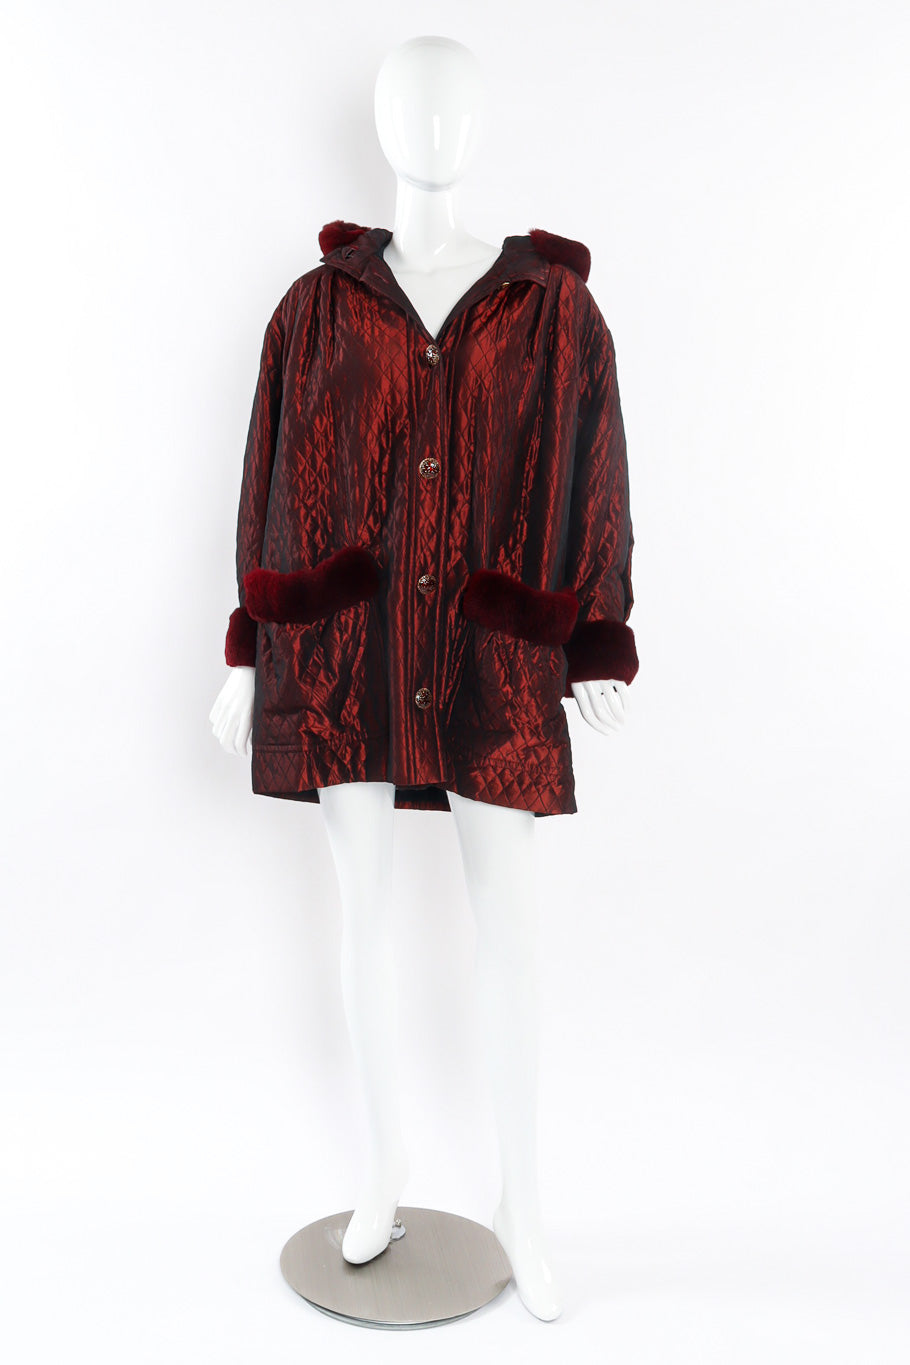 Effervescent quilted burgundy fur lined parka by Yves Saint Laurent long view  @recessla